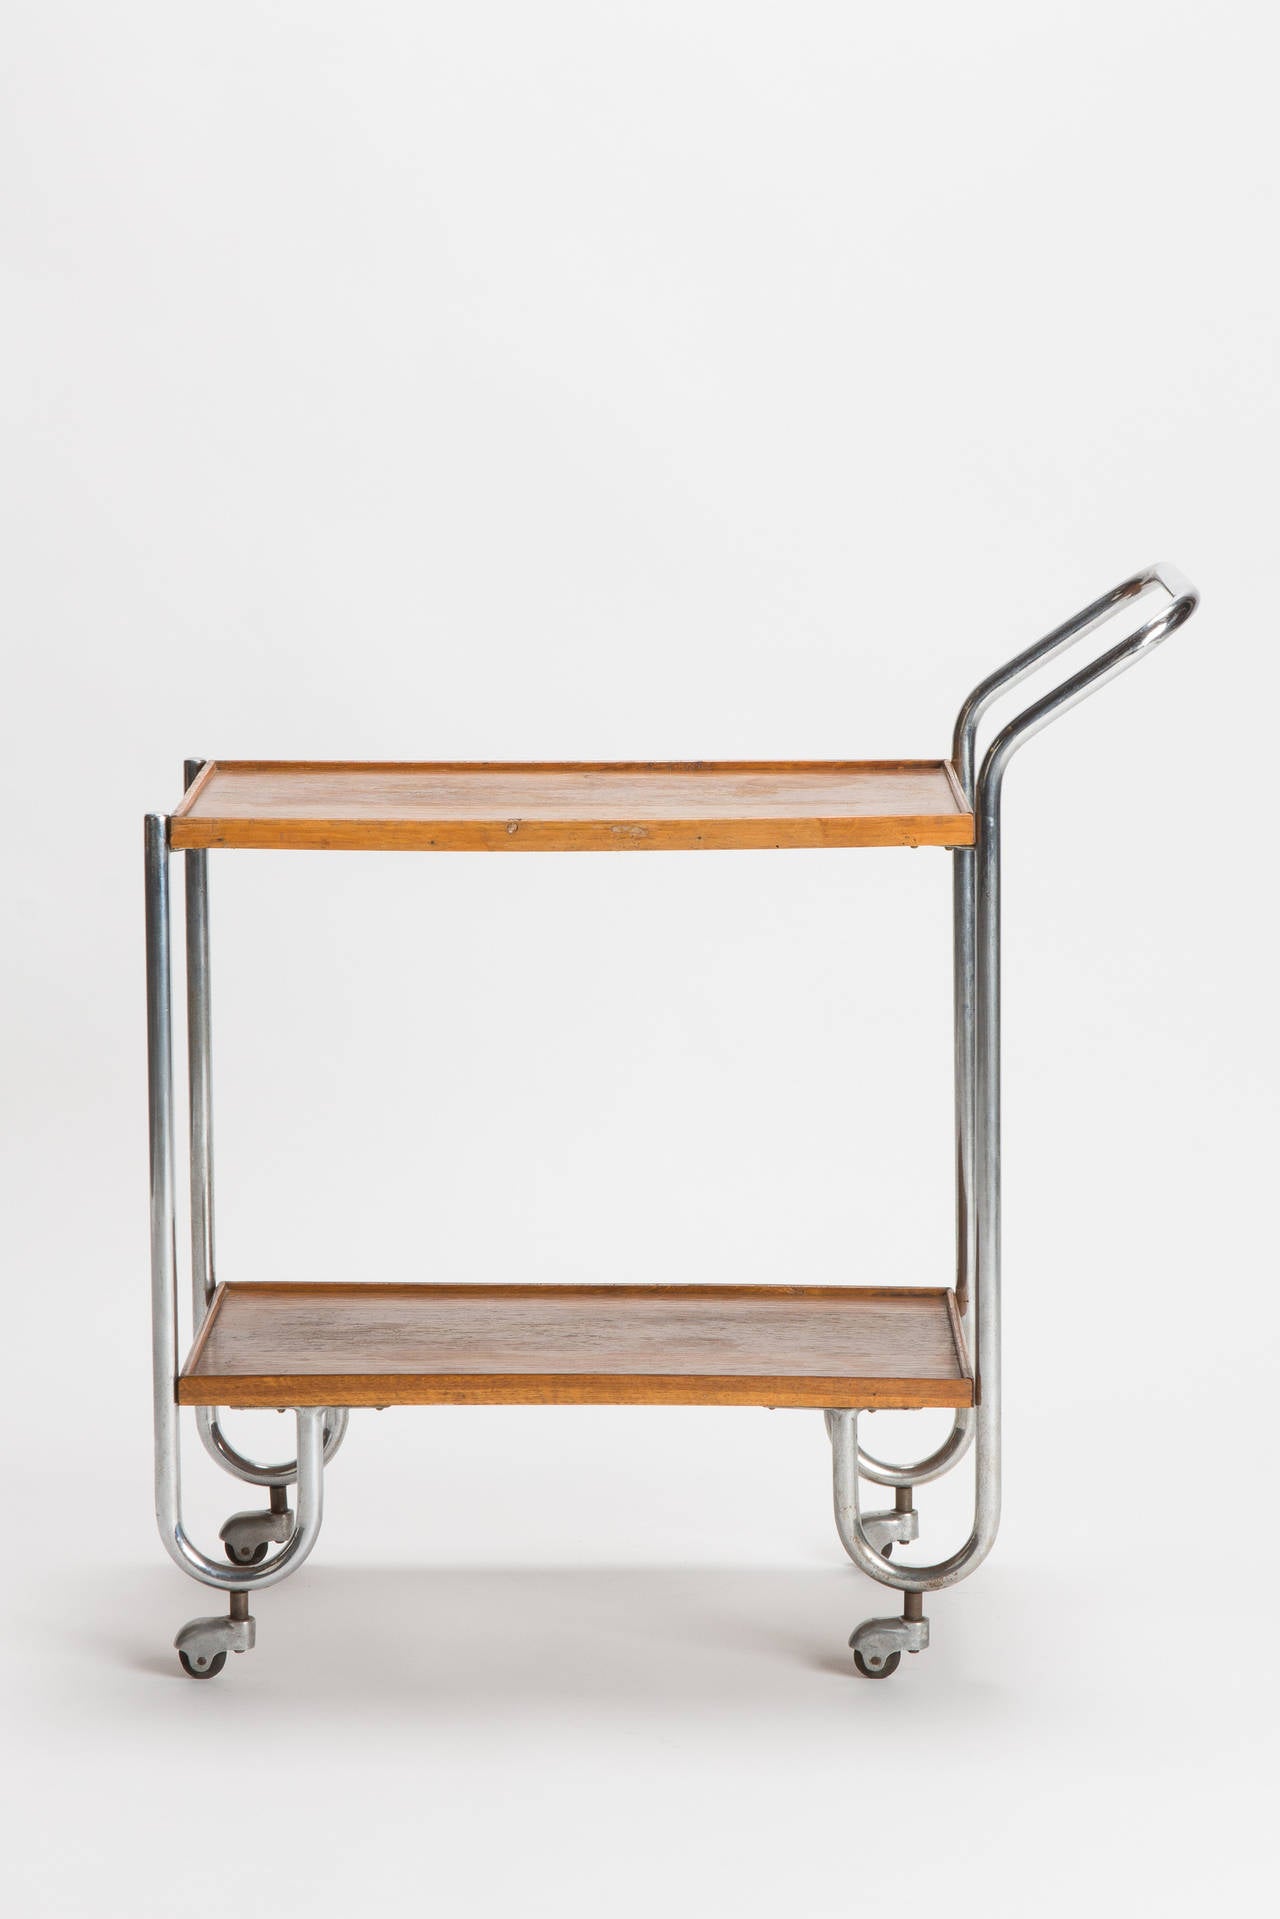 Stunning and unique Bauhaus bar cart from the 1930s, Italy. The shelve spaces are made of oak, steel tube frame on adorable old wheels.